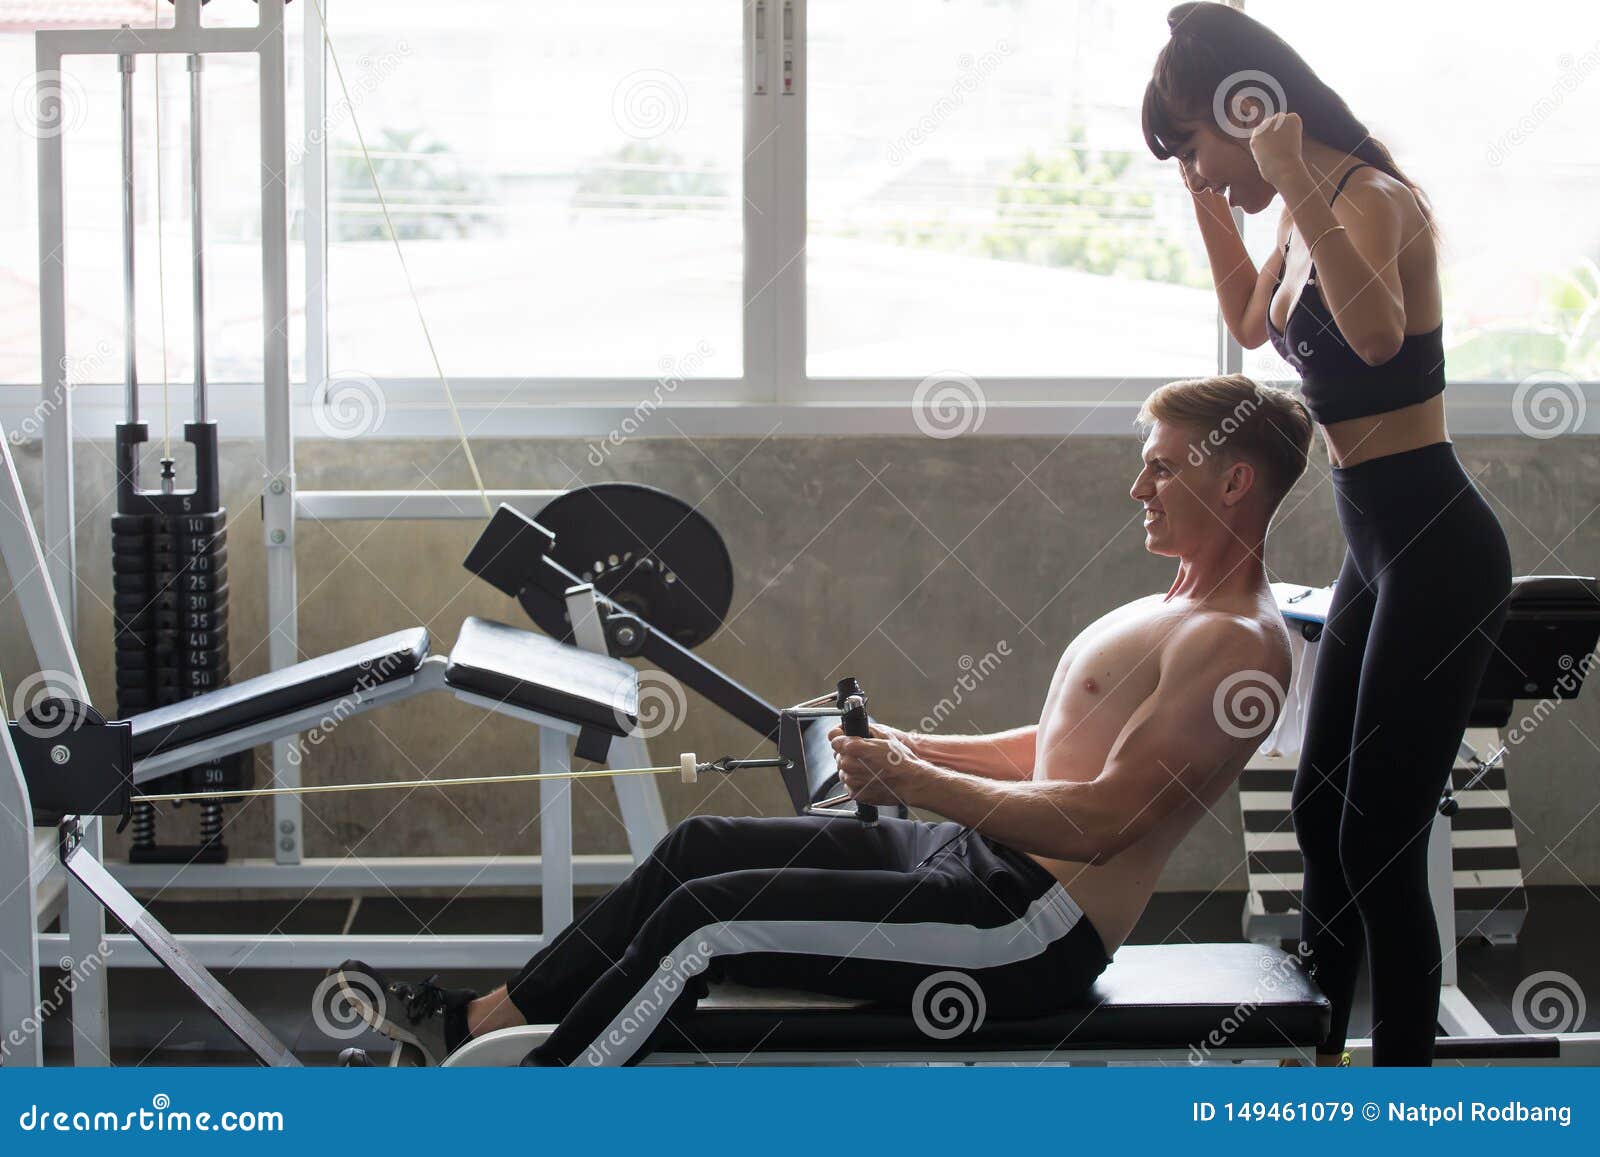 Chest Workout With Cables - Stock Image - Everypixel